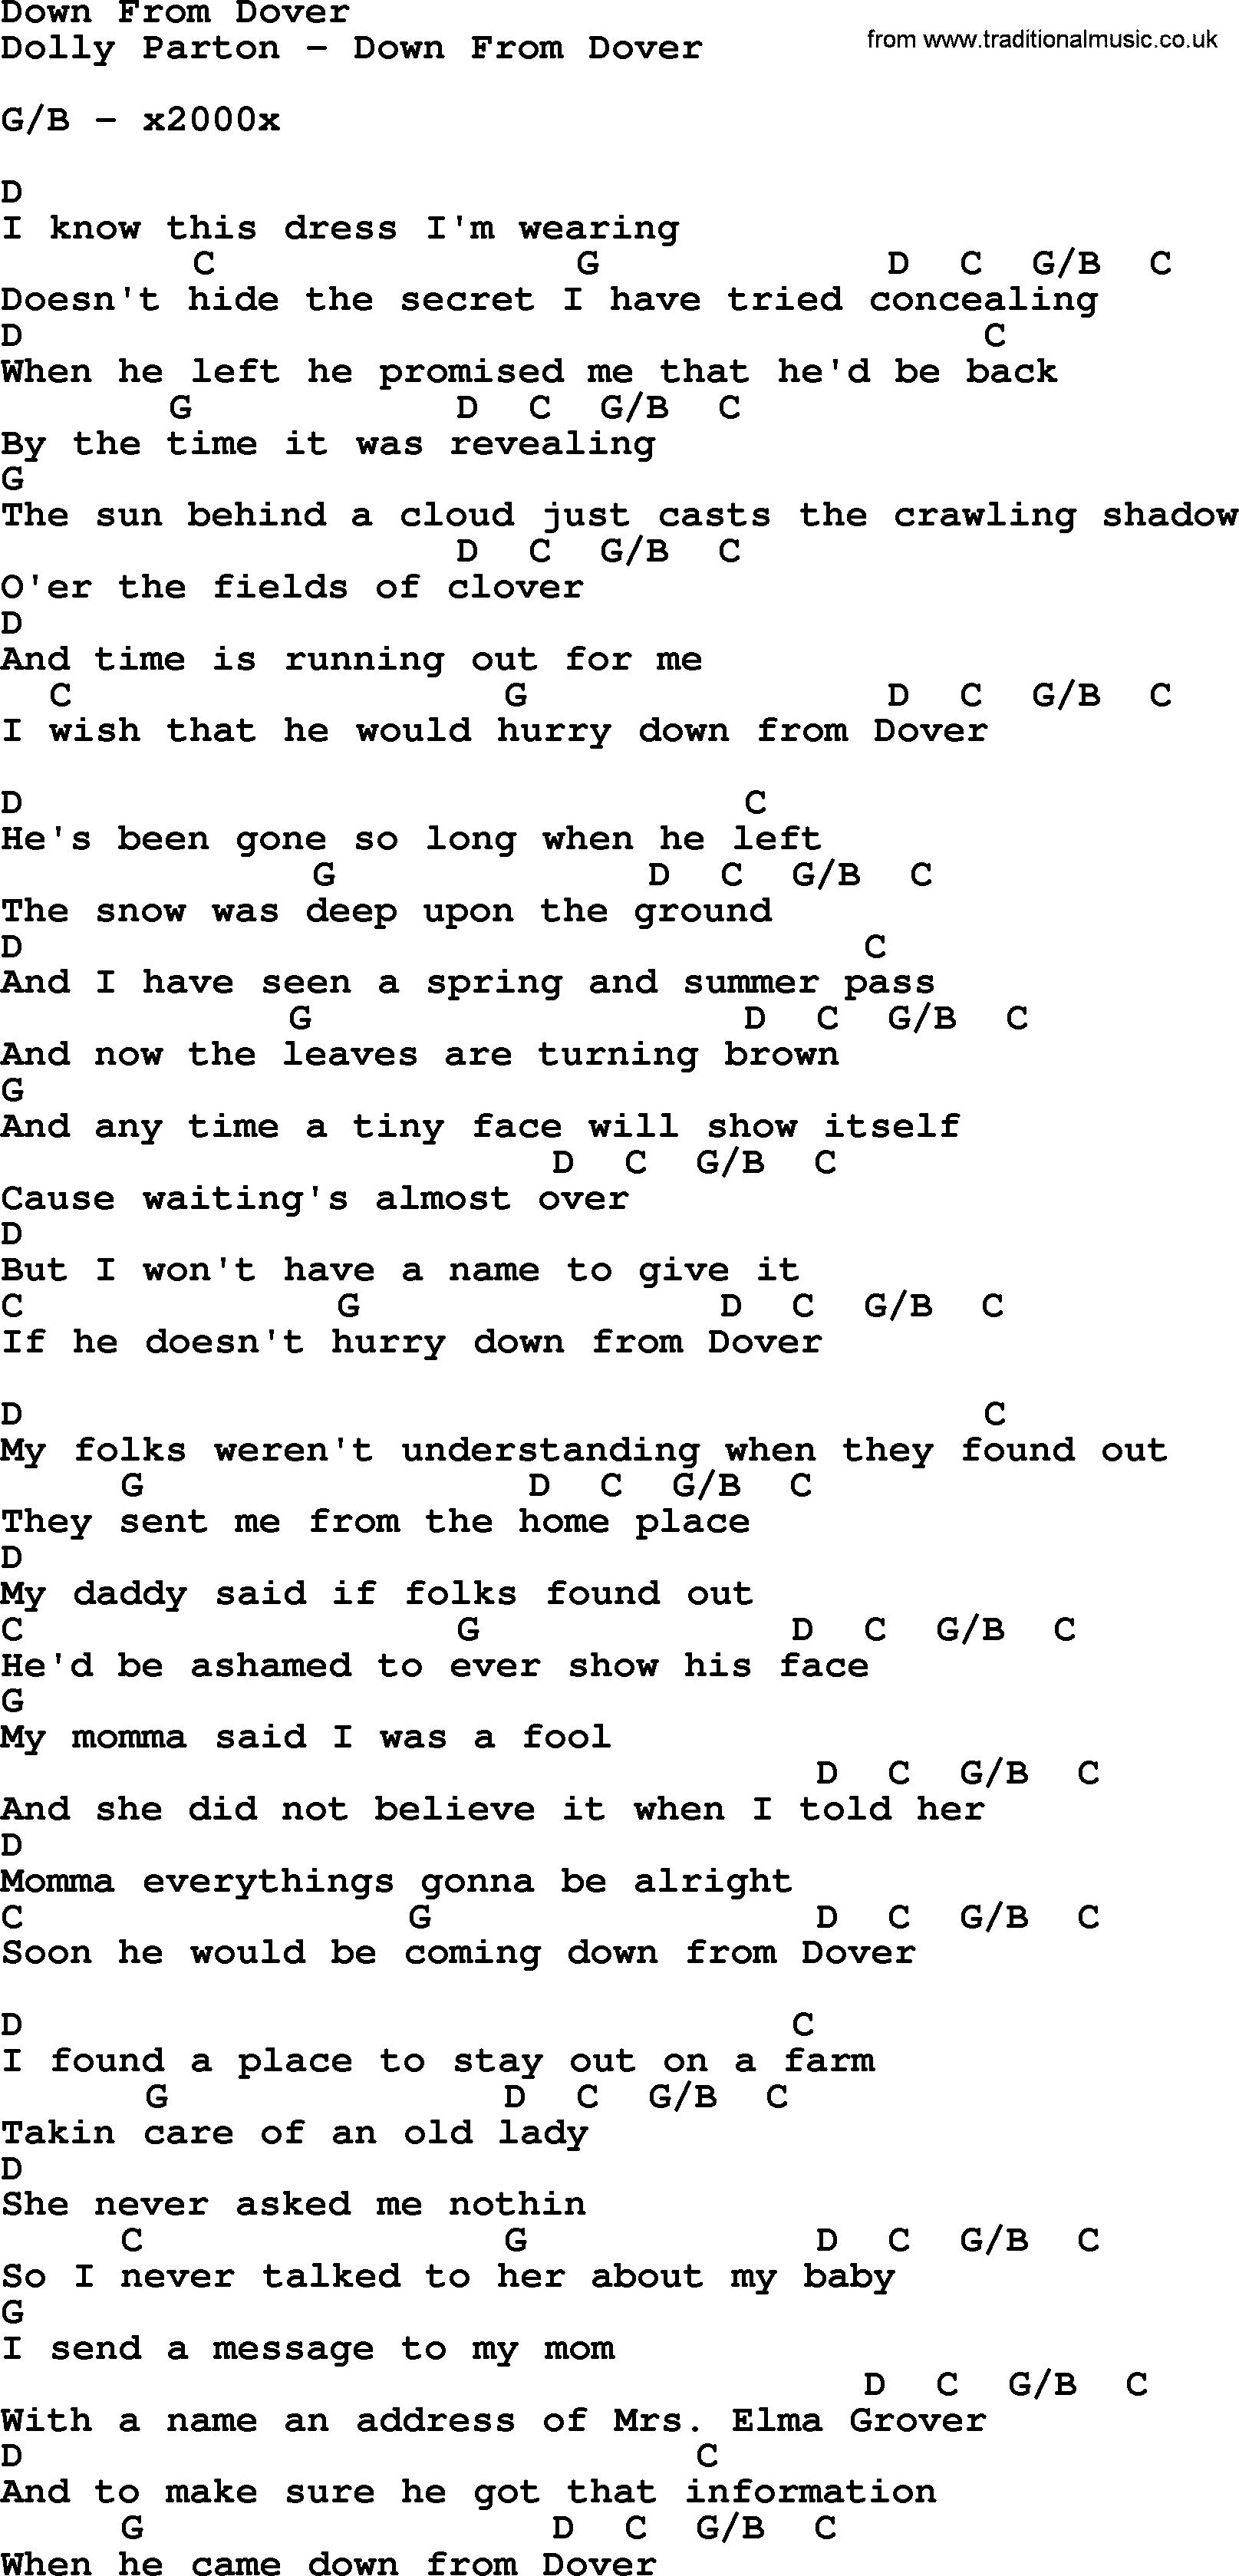 Bluegrass song: Down From Dover, lyrics and chords